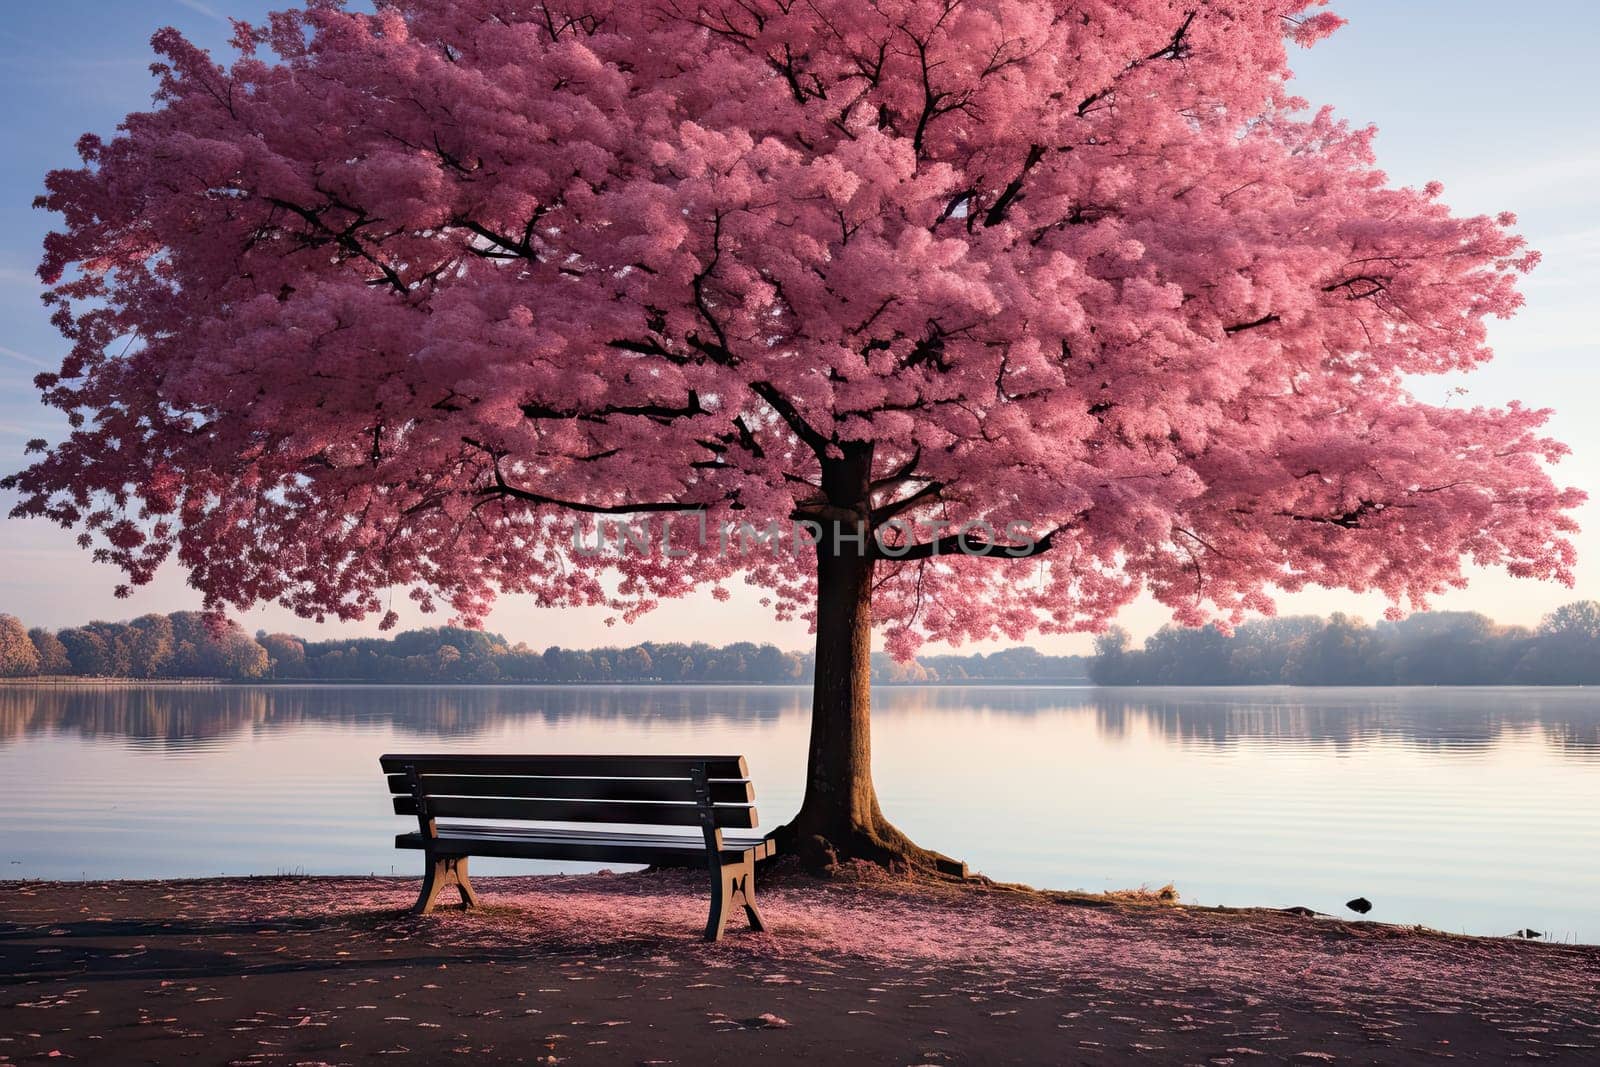 A Serene Retreat: A Bench Under a Blossoming Pink Cherry Tree by a Tranquil Lake